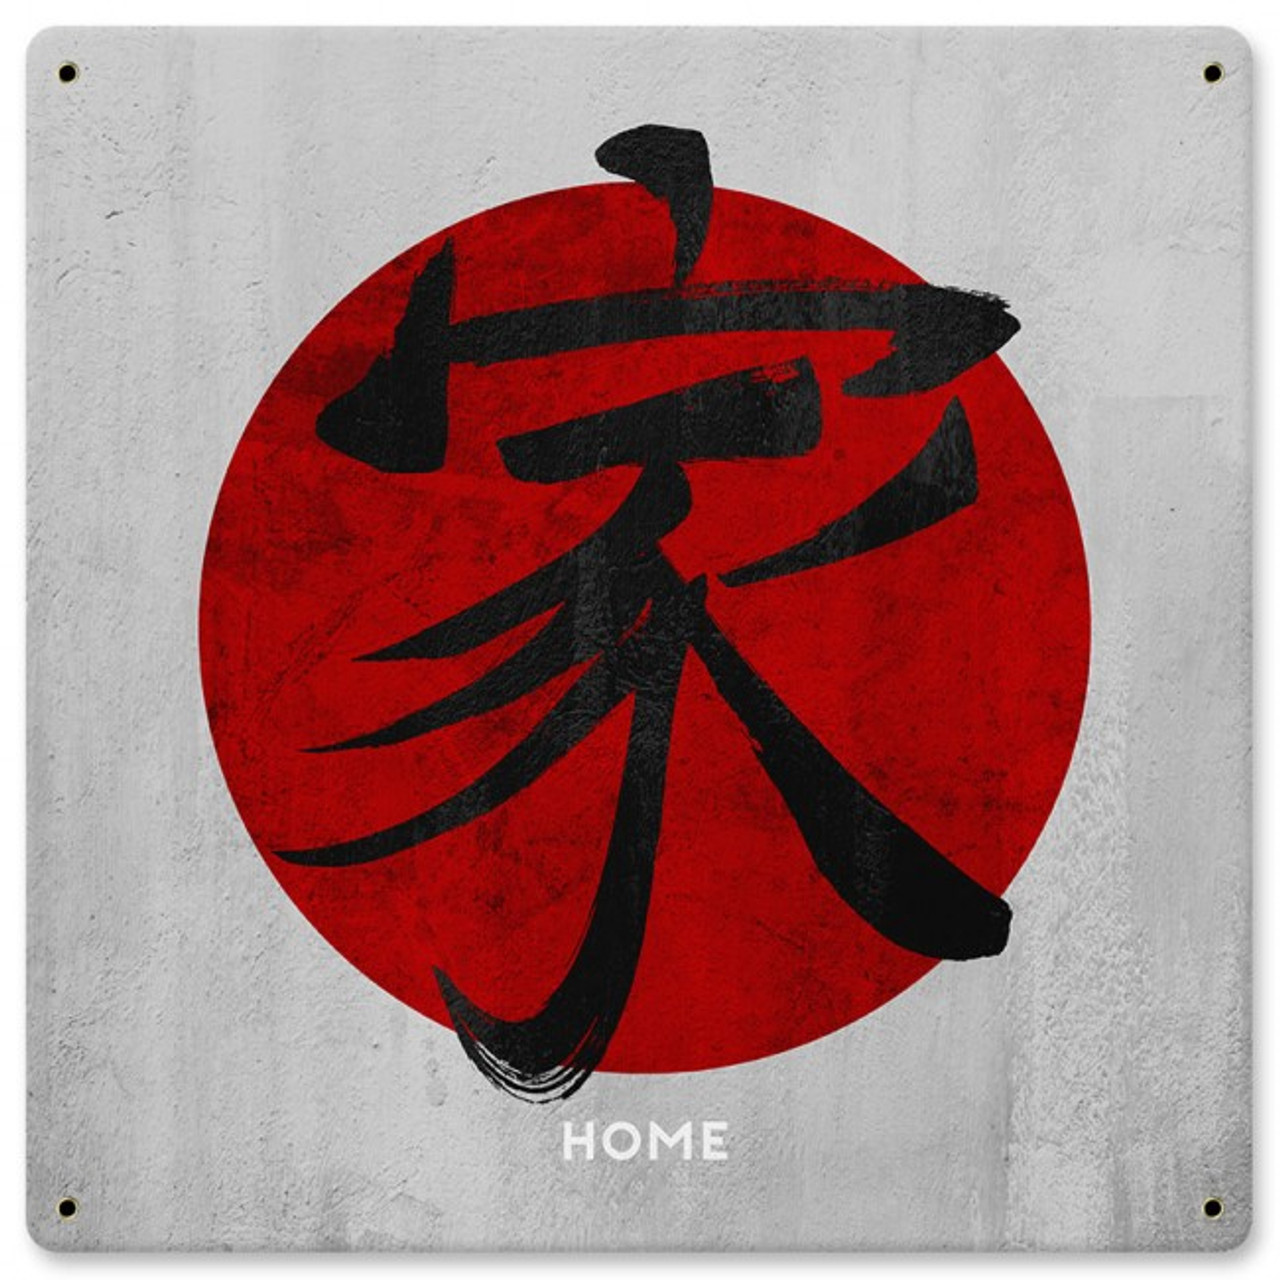 Home Kanji Metal Sign 12 x 12 Inches